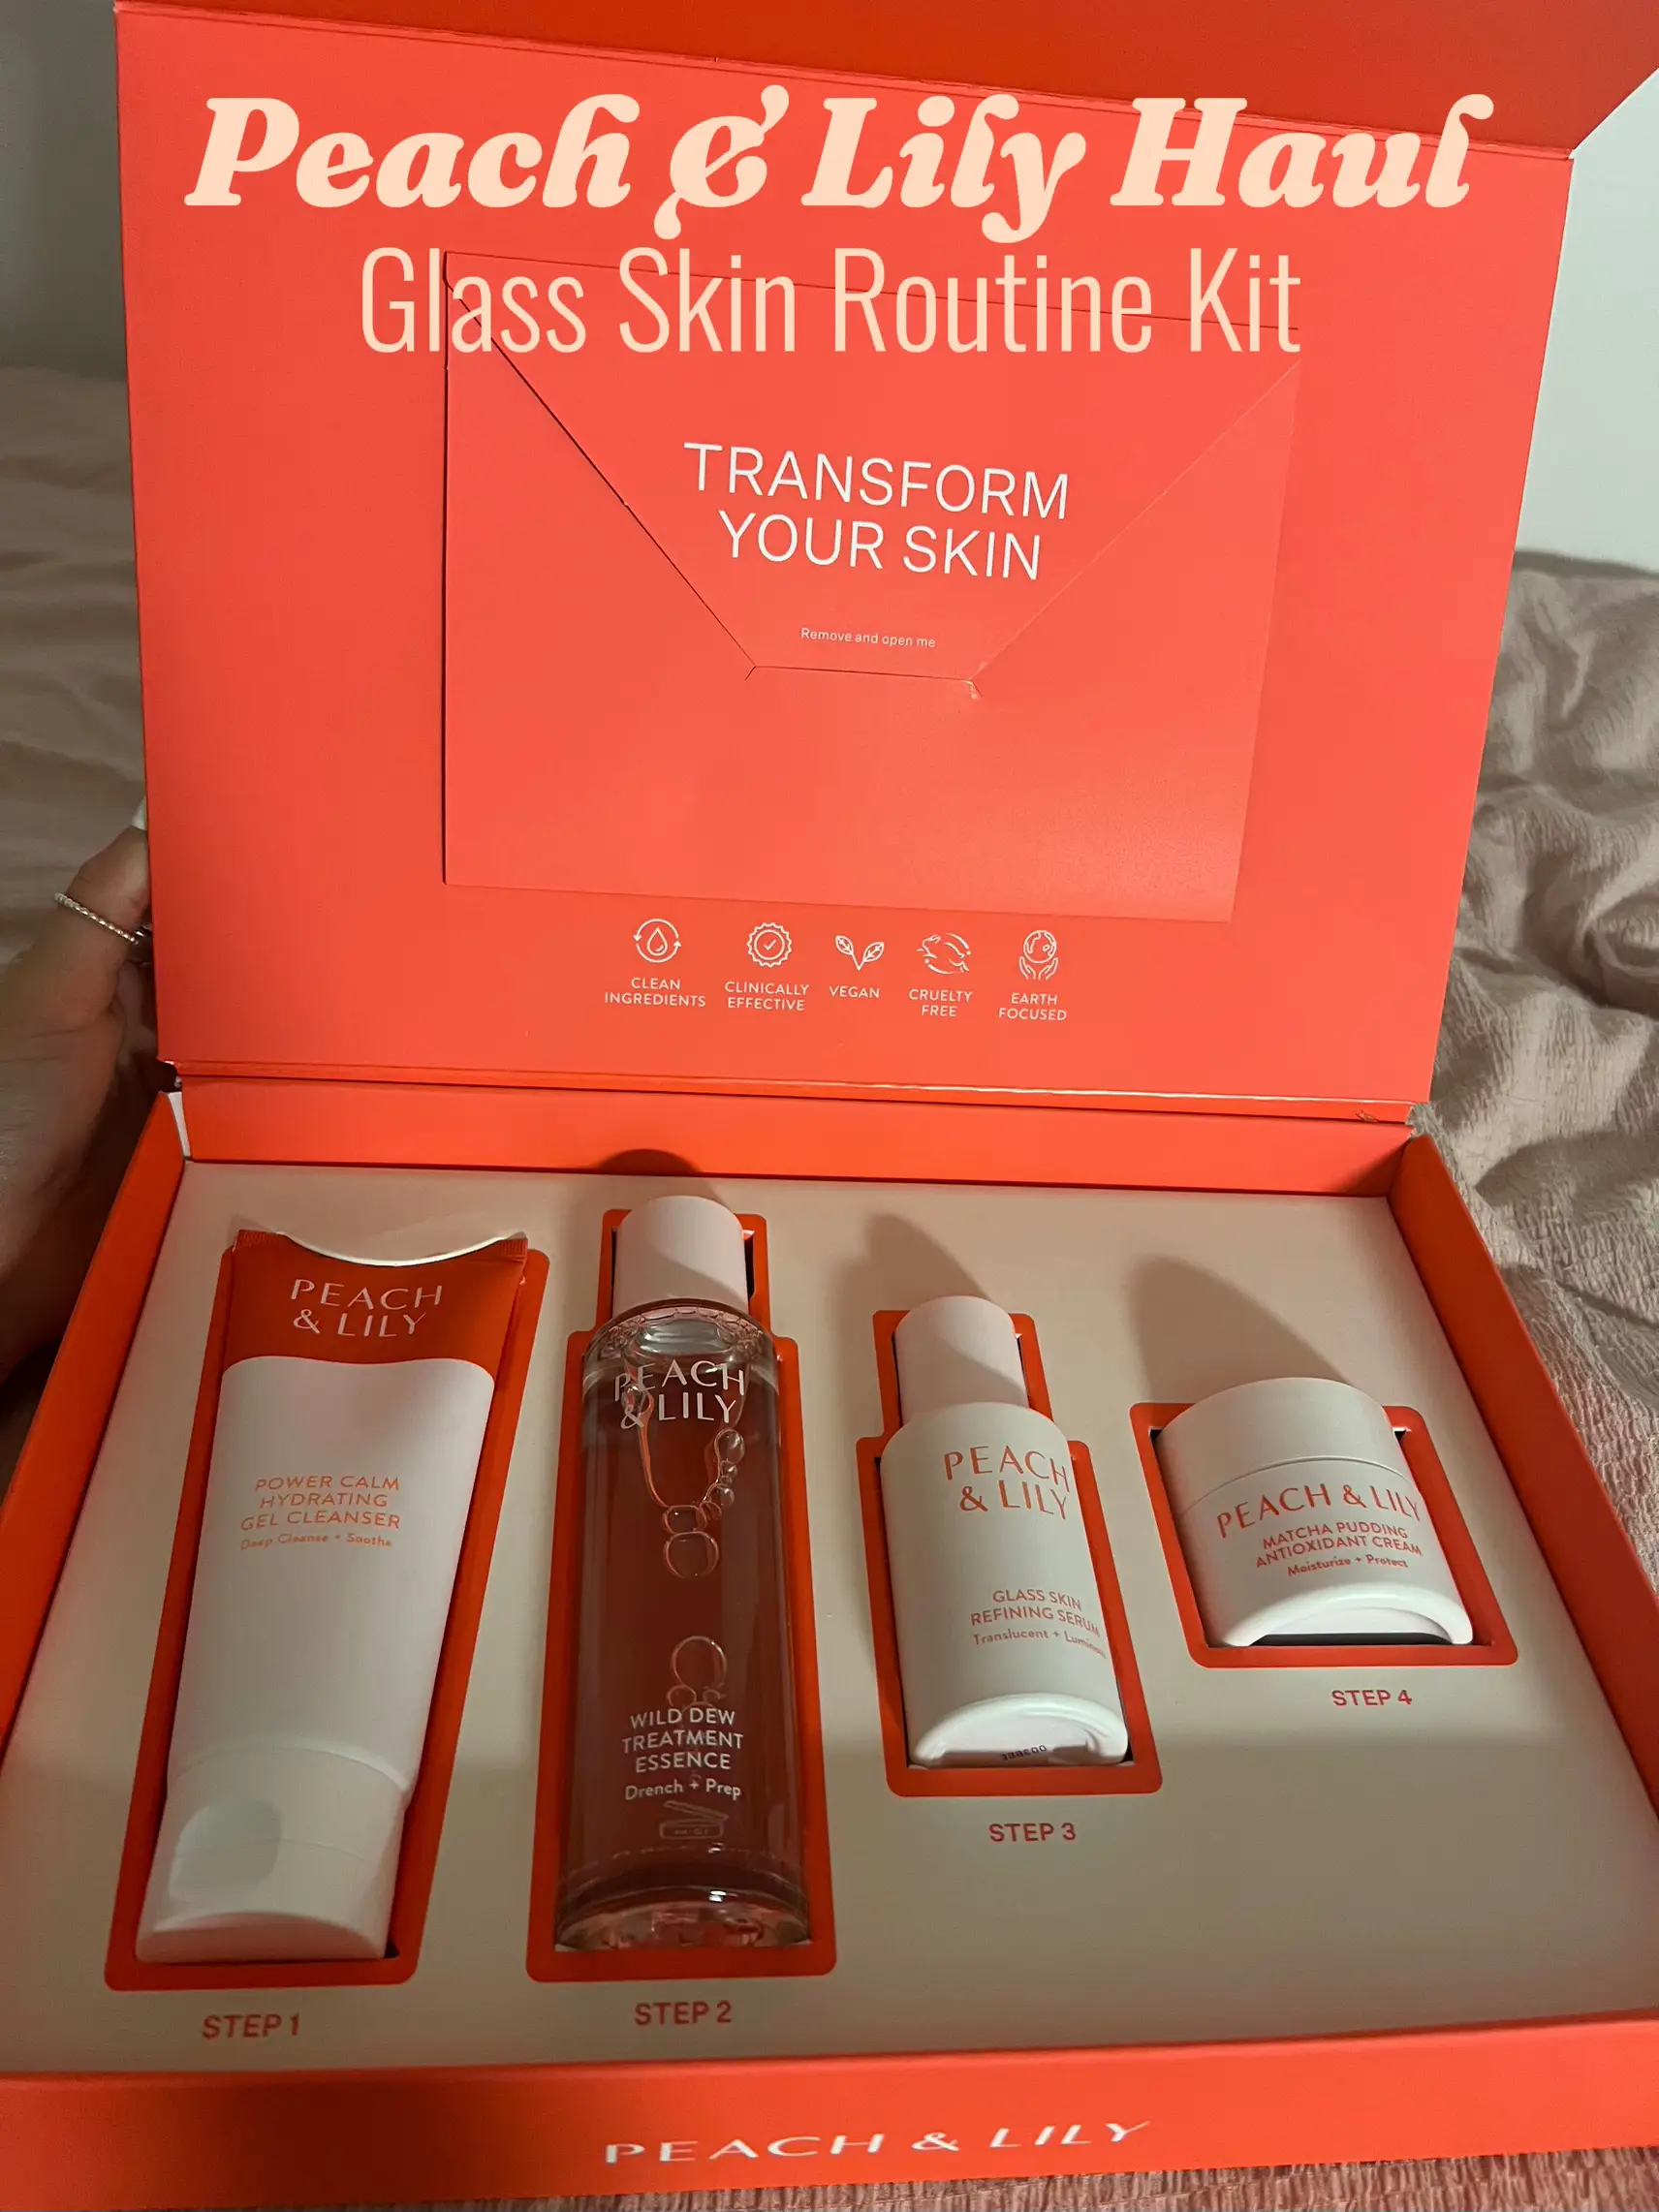 Peach and lily glass skin serum, Gallery posted by Safna Suhood